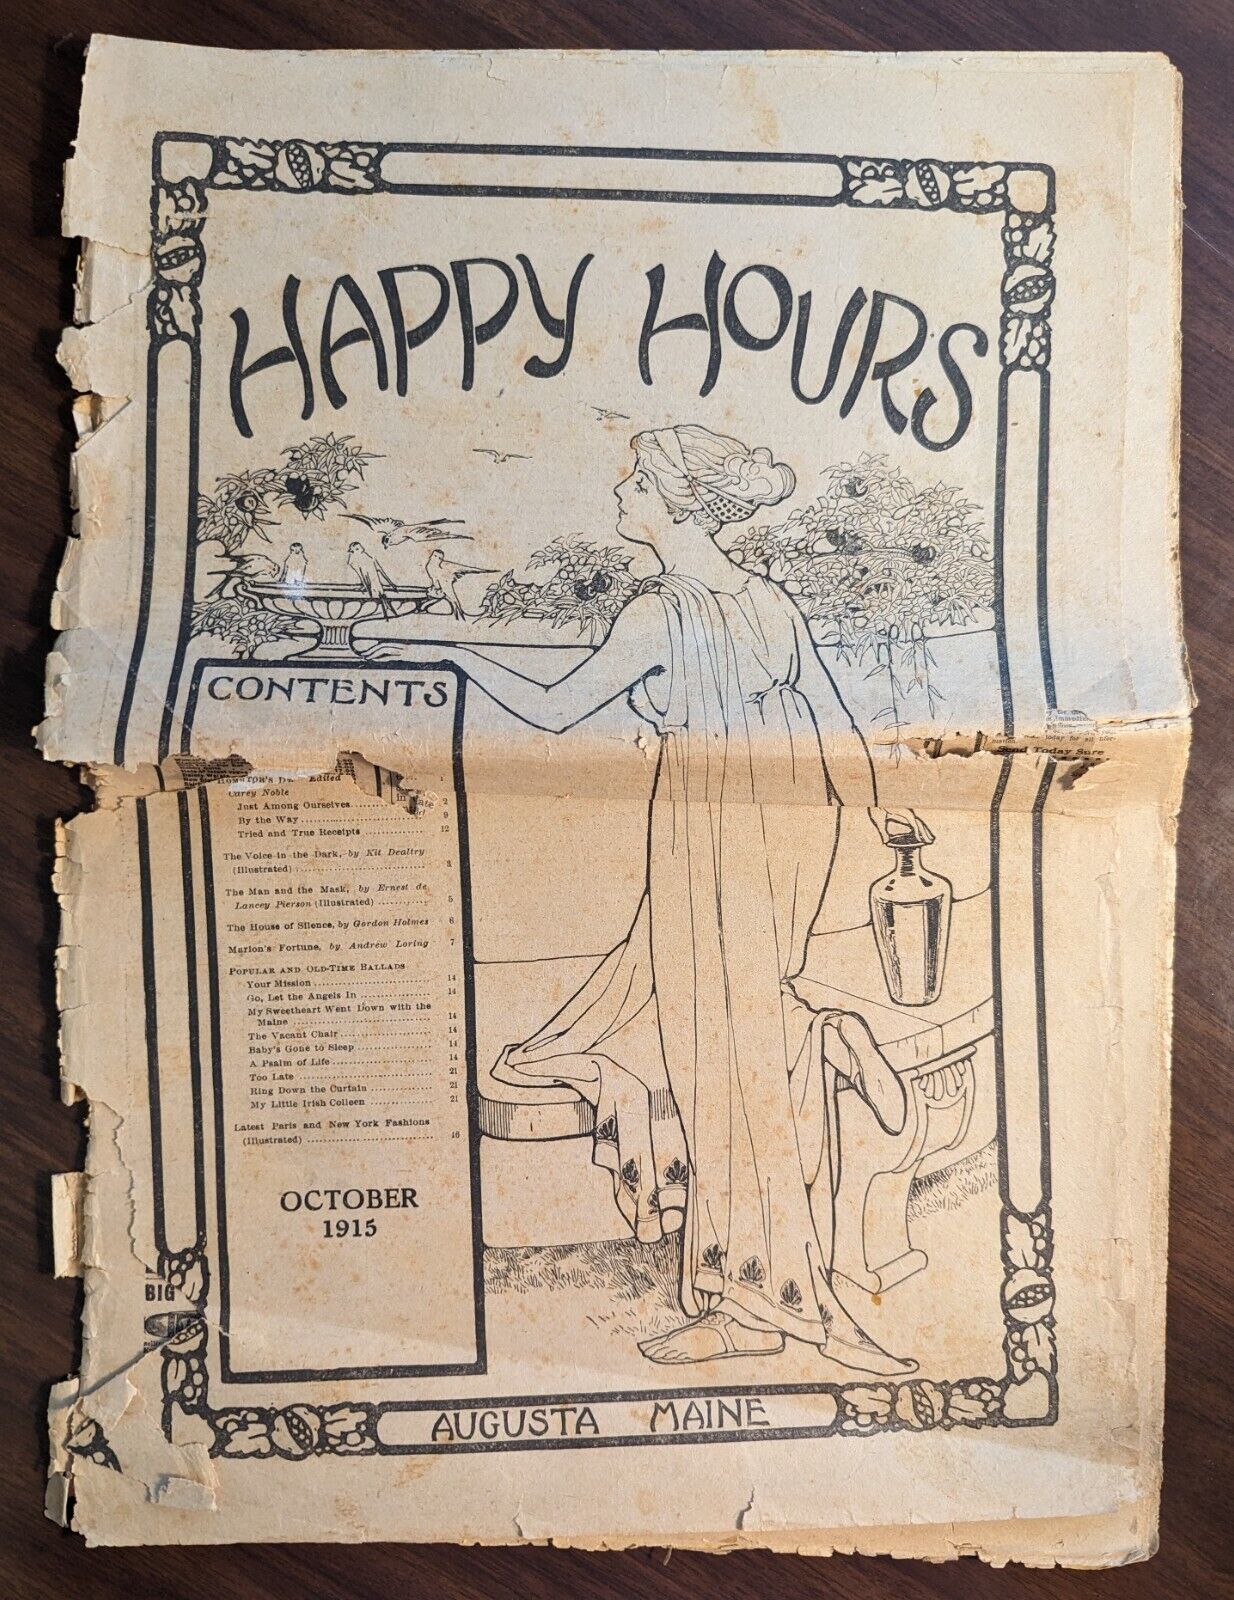 Happy Hours Newspaper 1915 October 15 Augusta Maine With Many Vintage Ads Inside